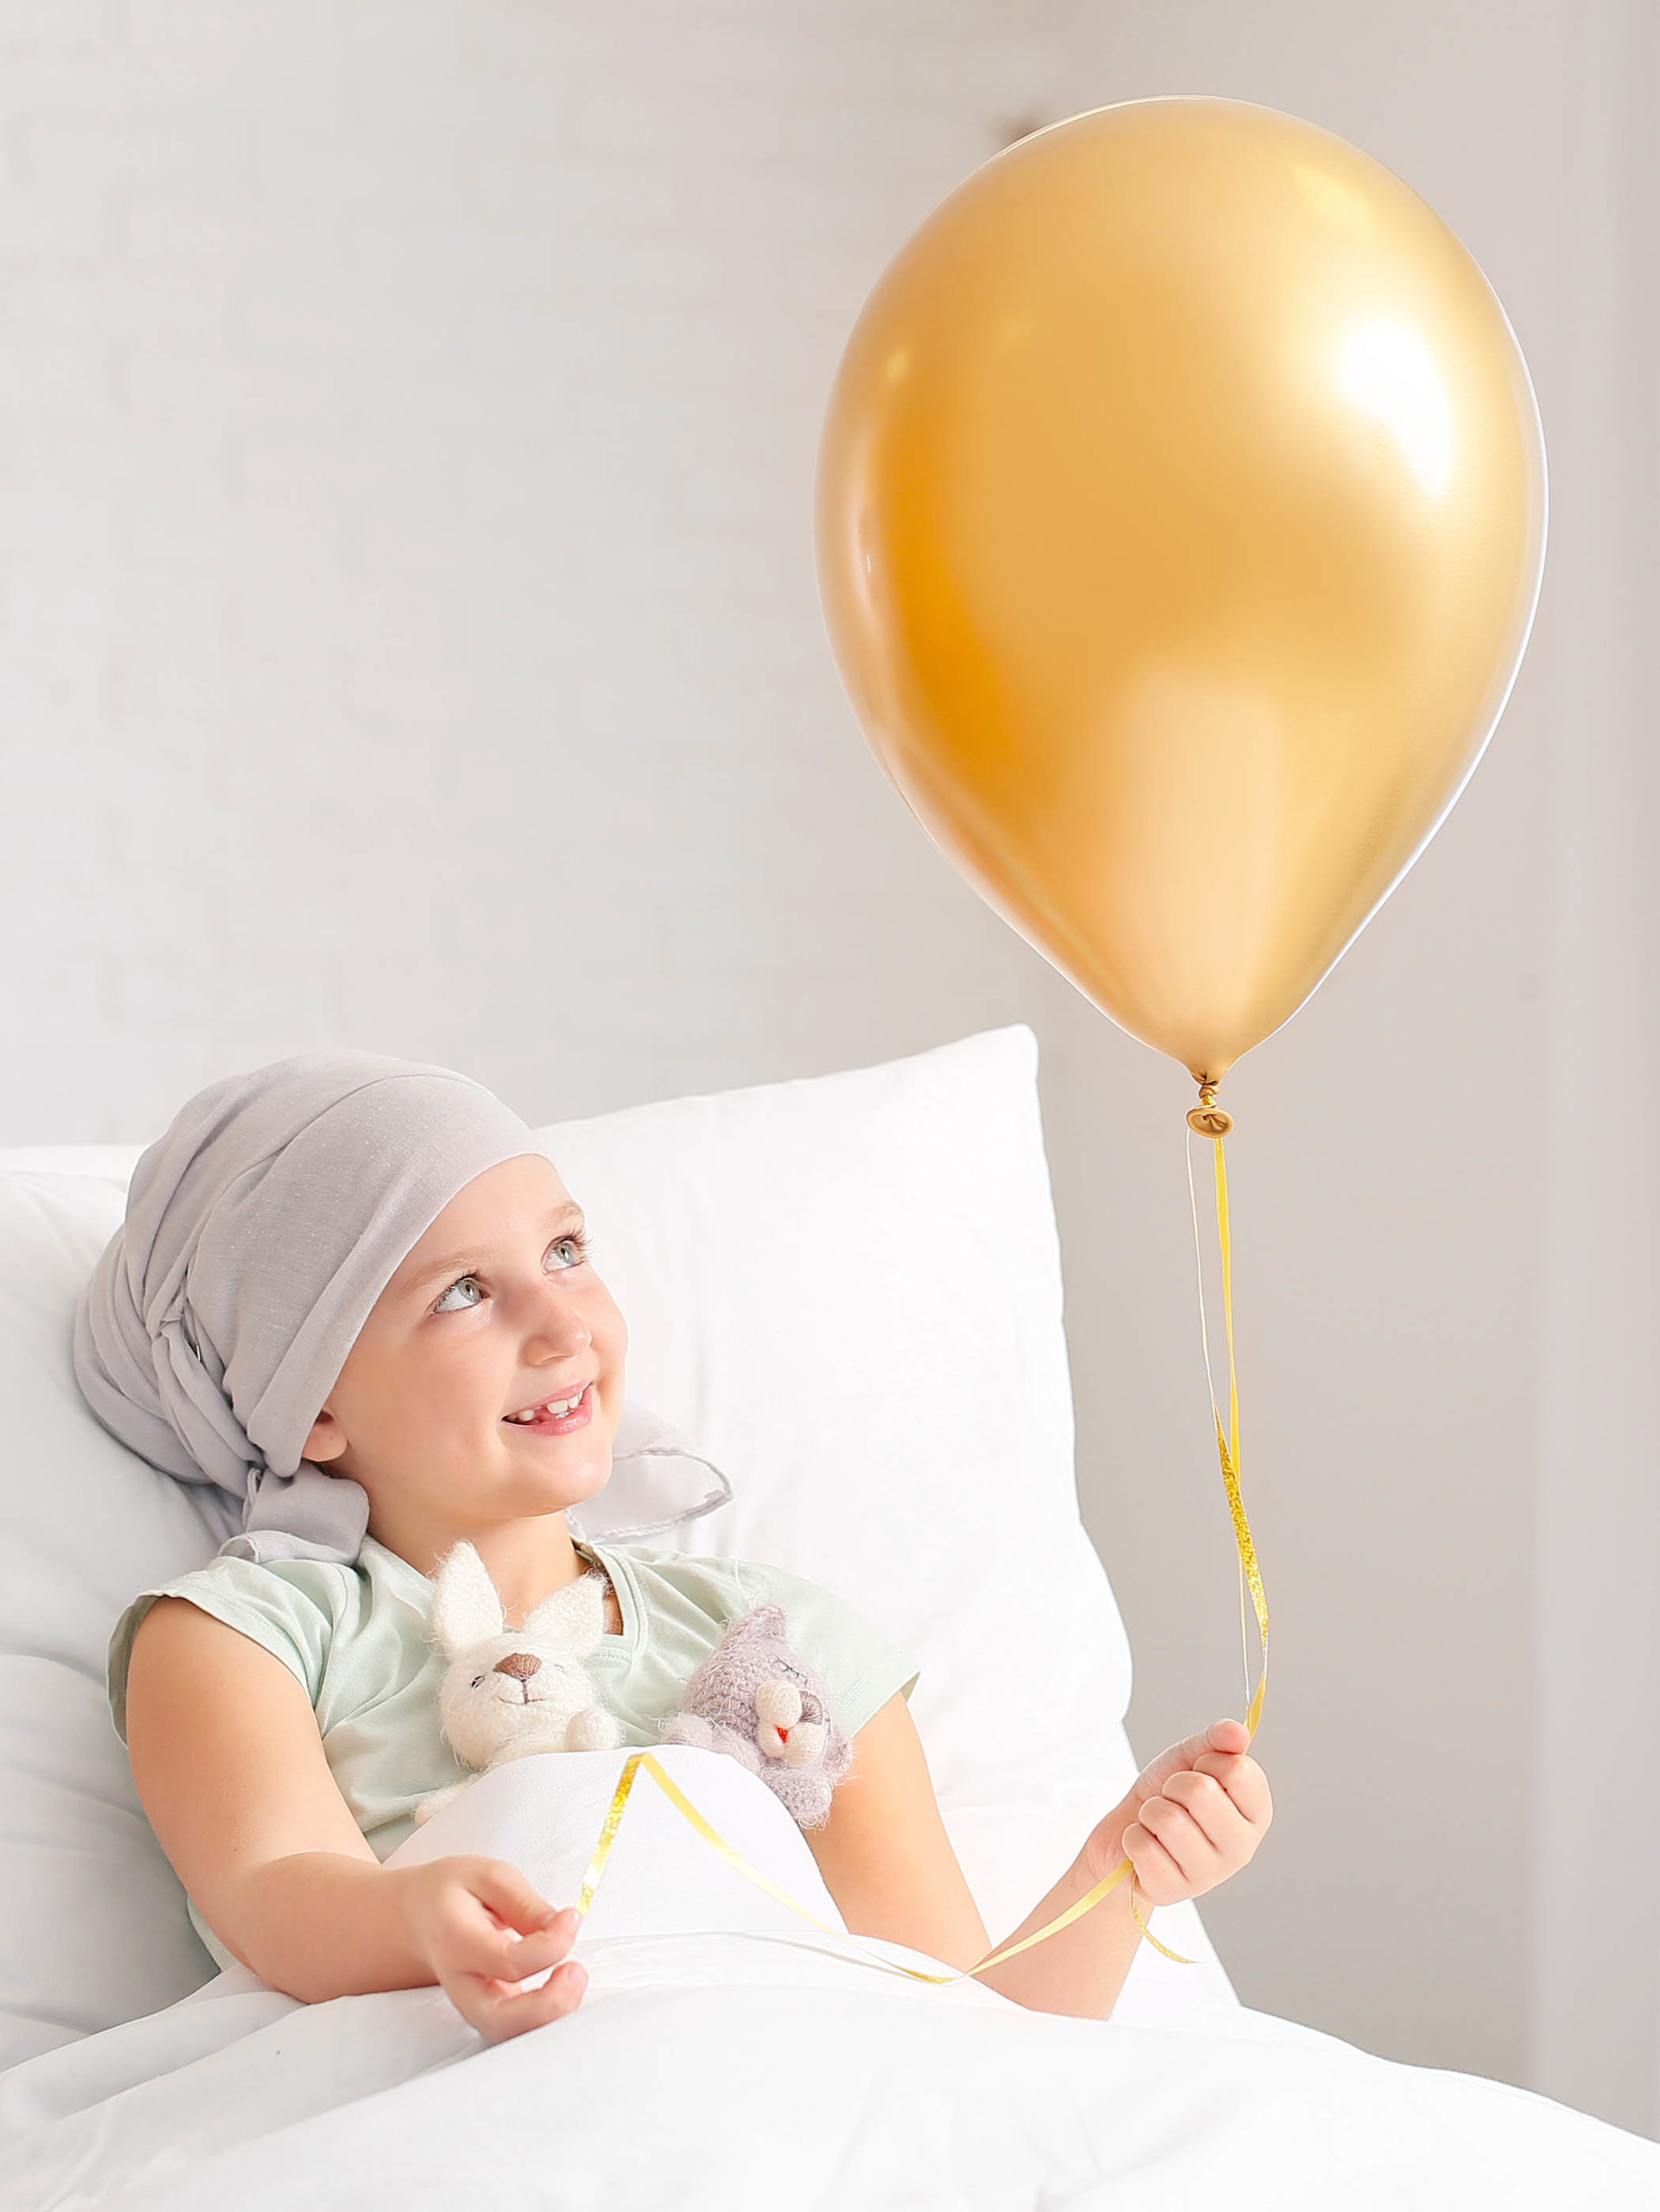 Little girl with golden balloon undergoing course of chemotherapy